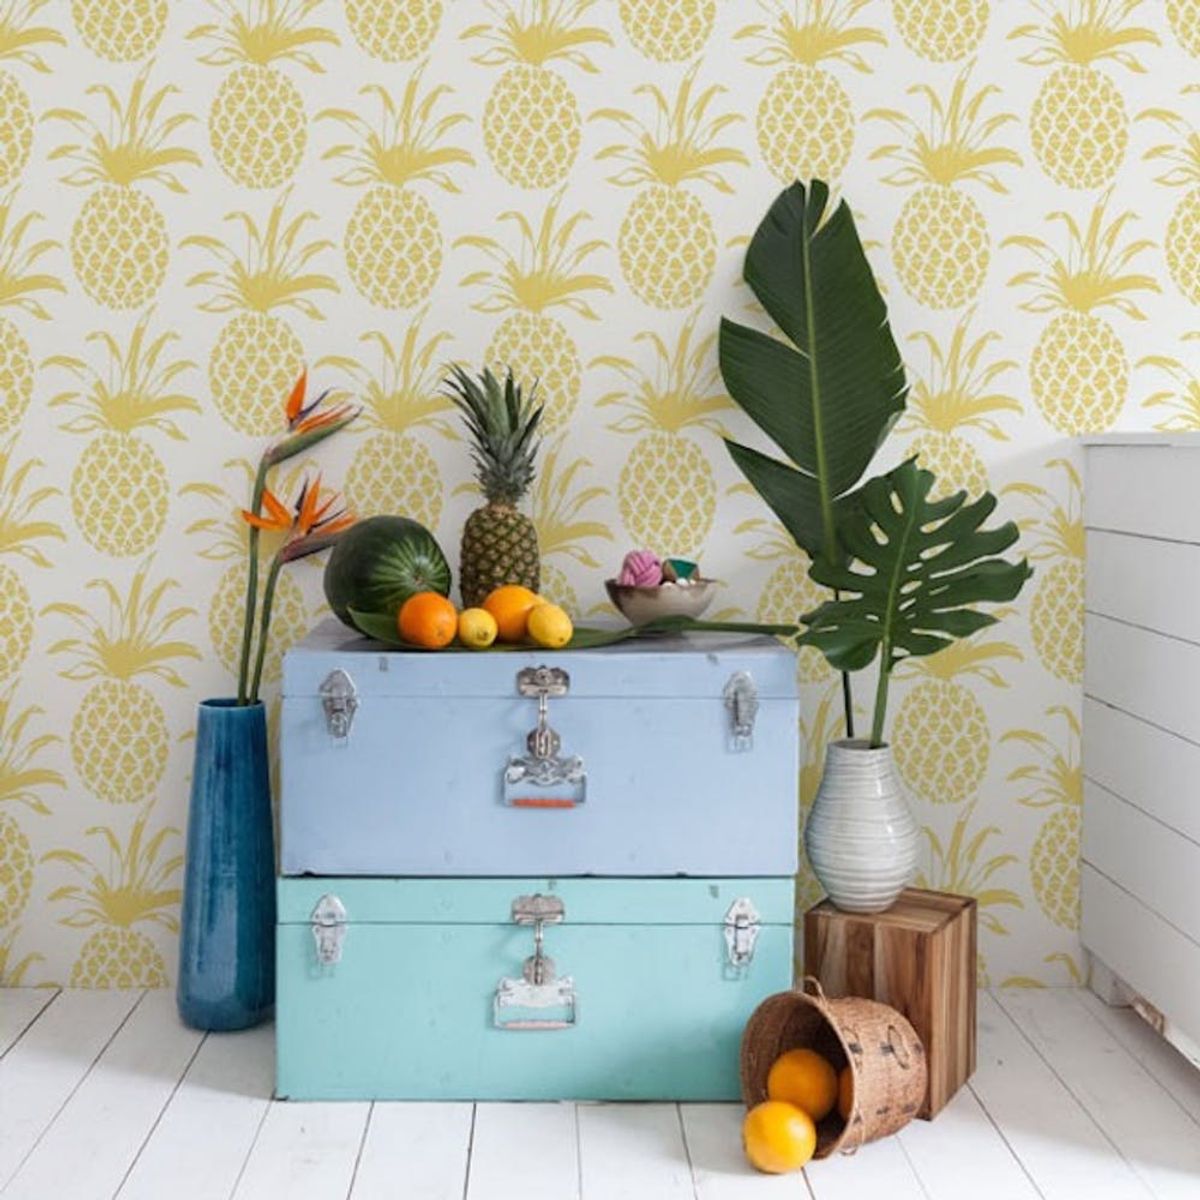 18 of the Prettiest Nature-Inspired Wallpapers and Wall Decals